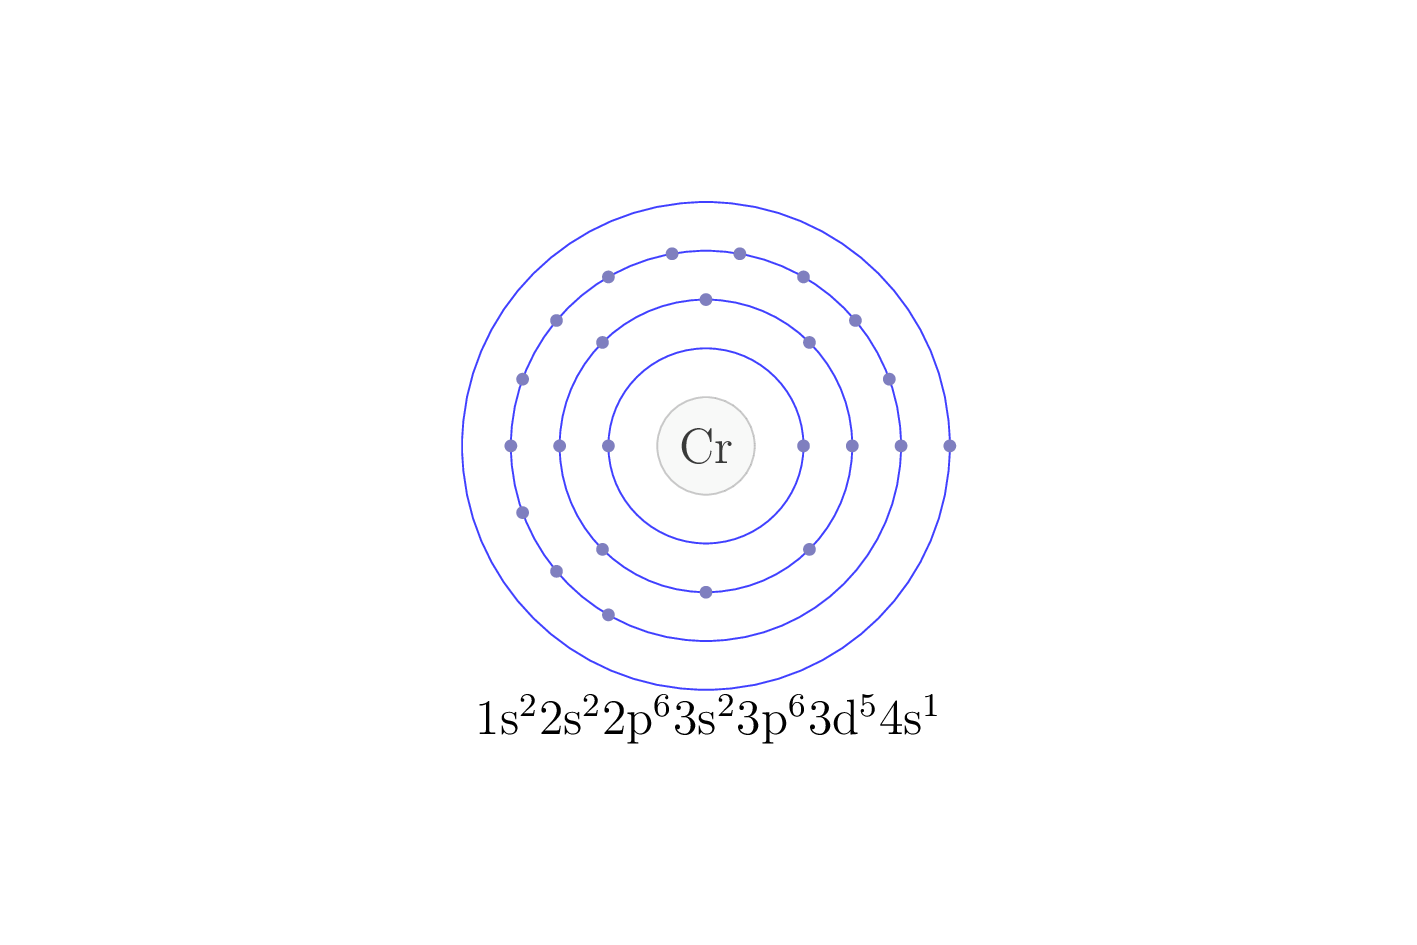 electron configuration of element Cr